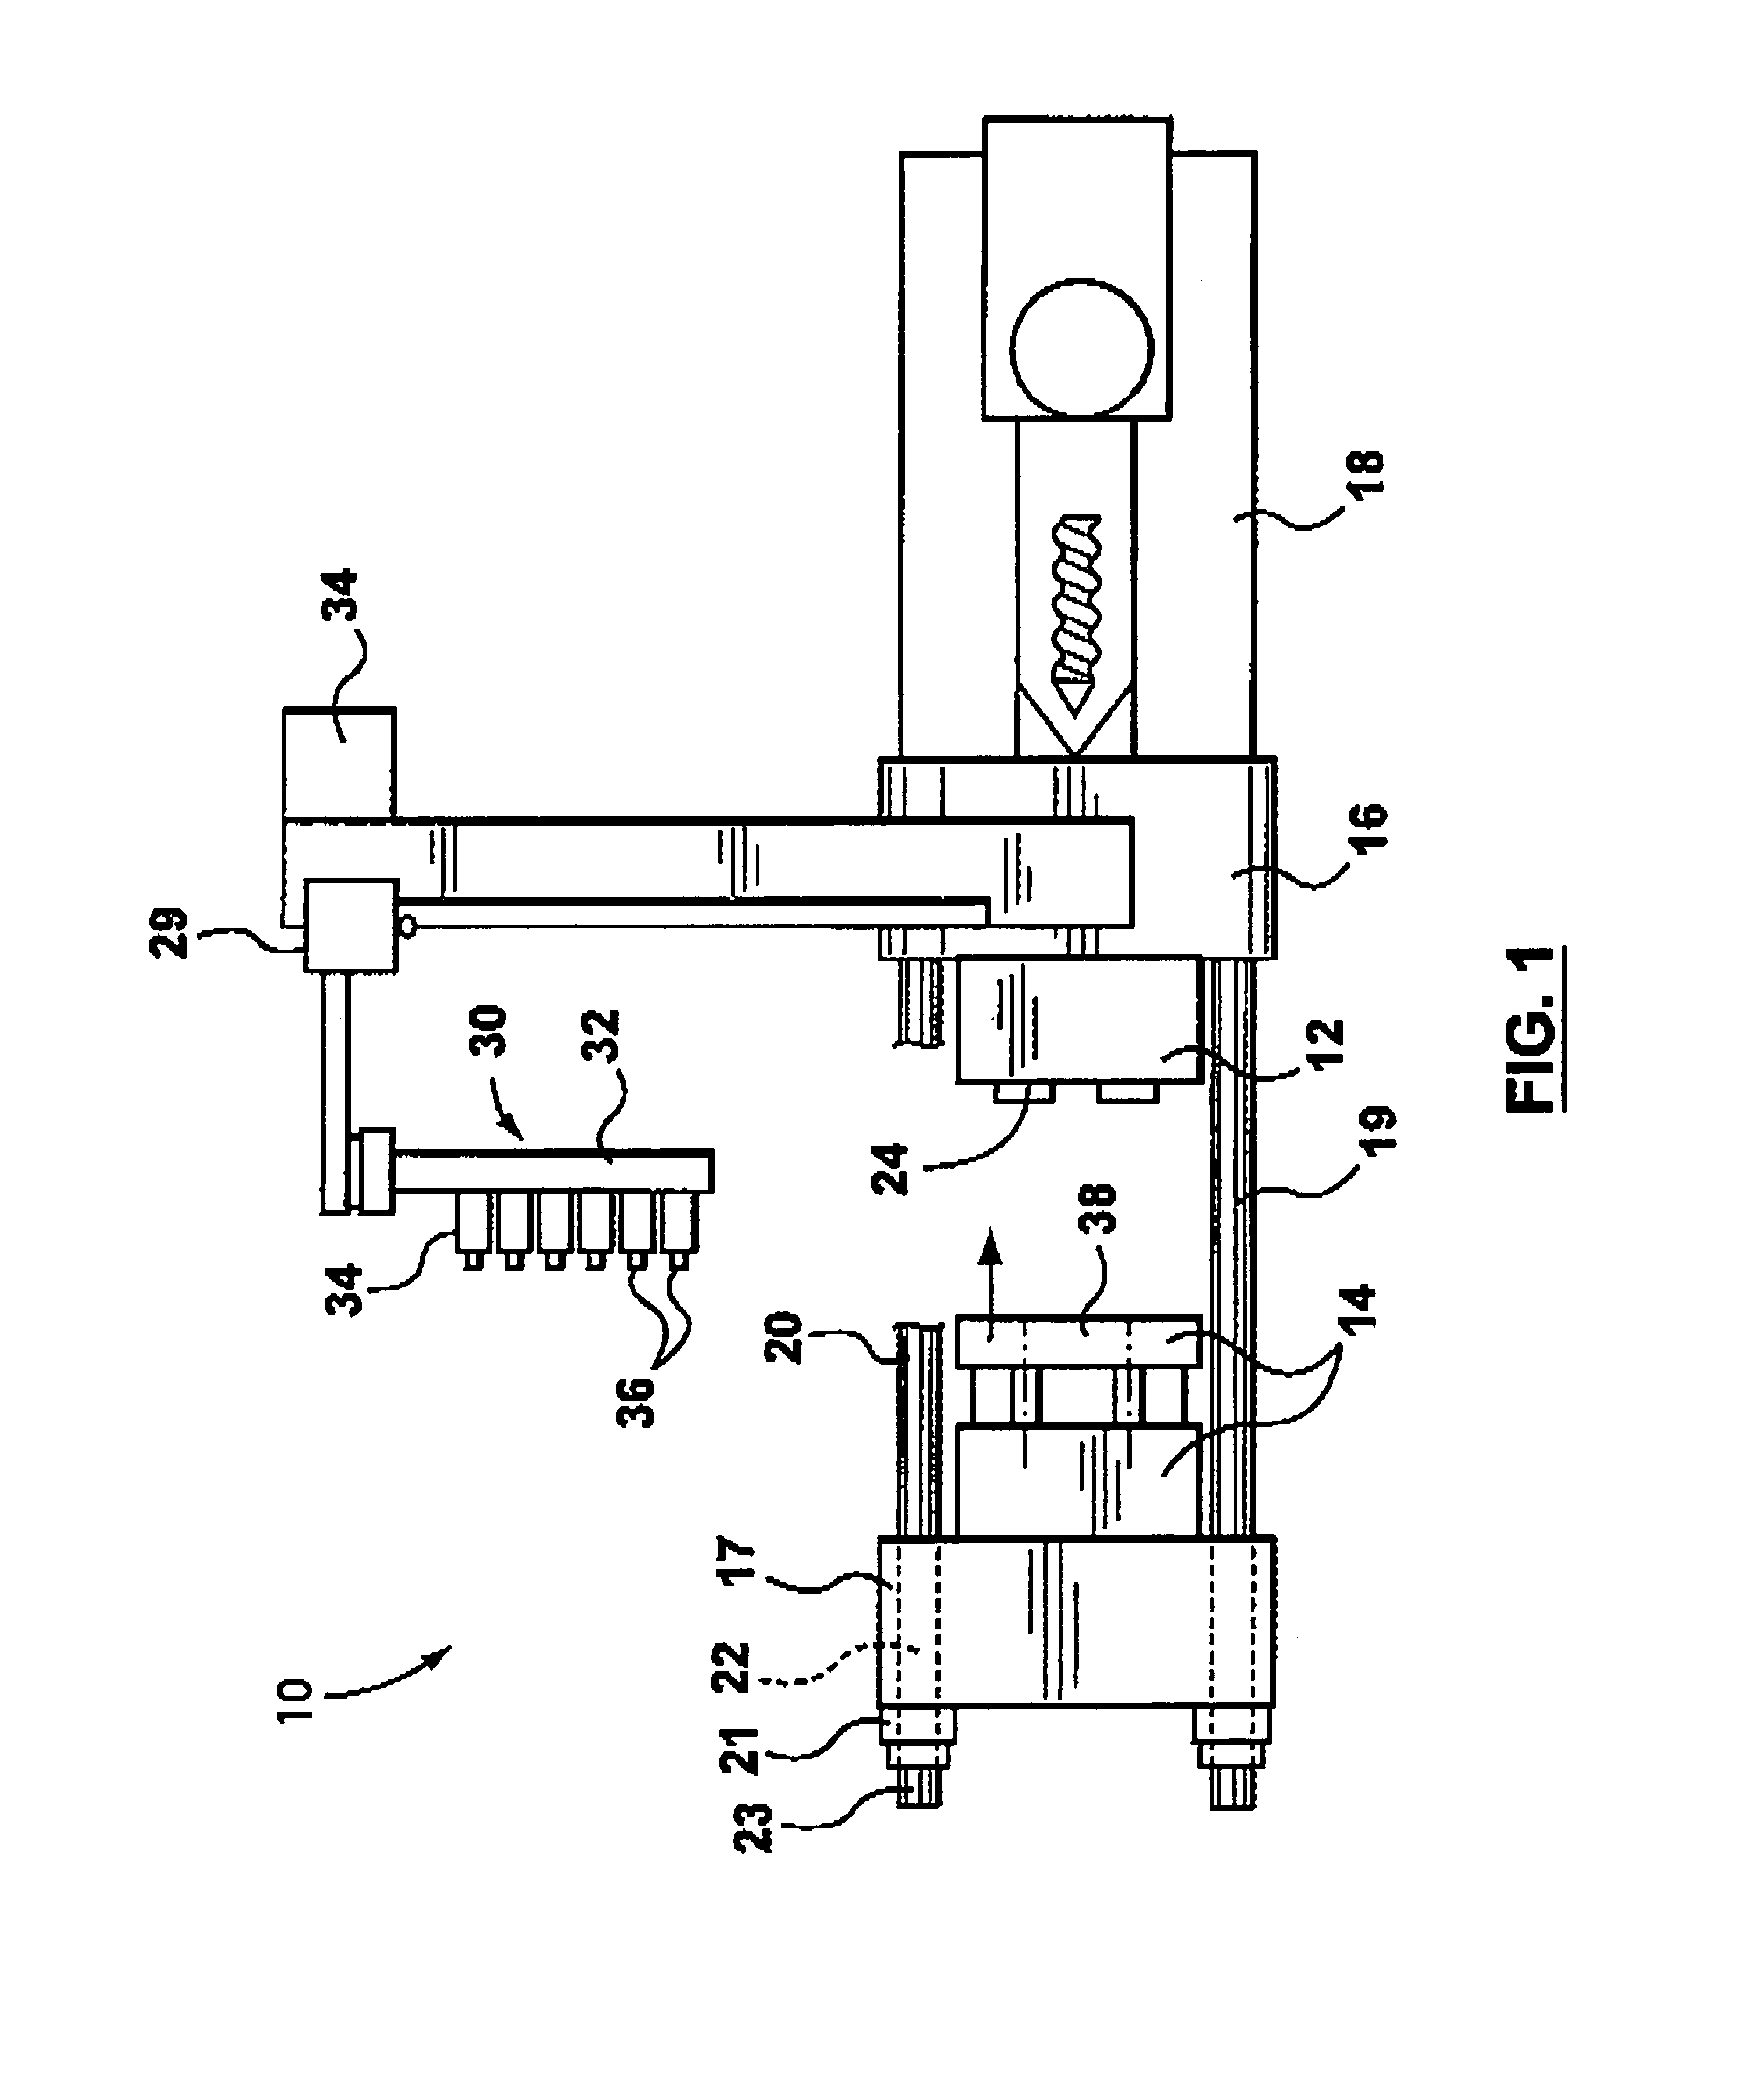 Intelligent molding environment and method of configuring a molding system